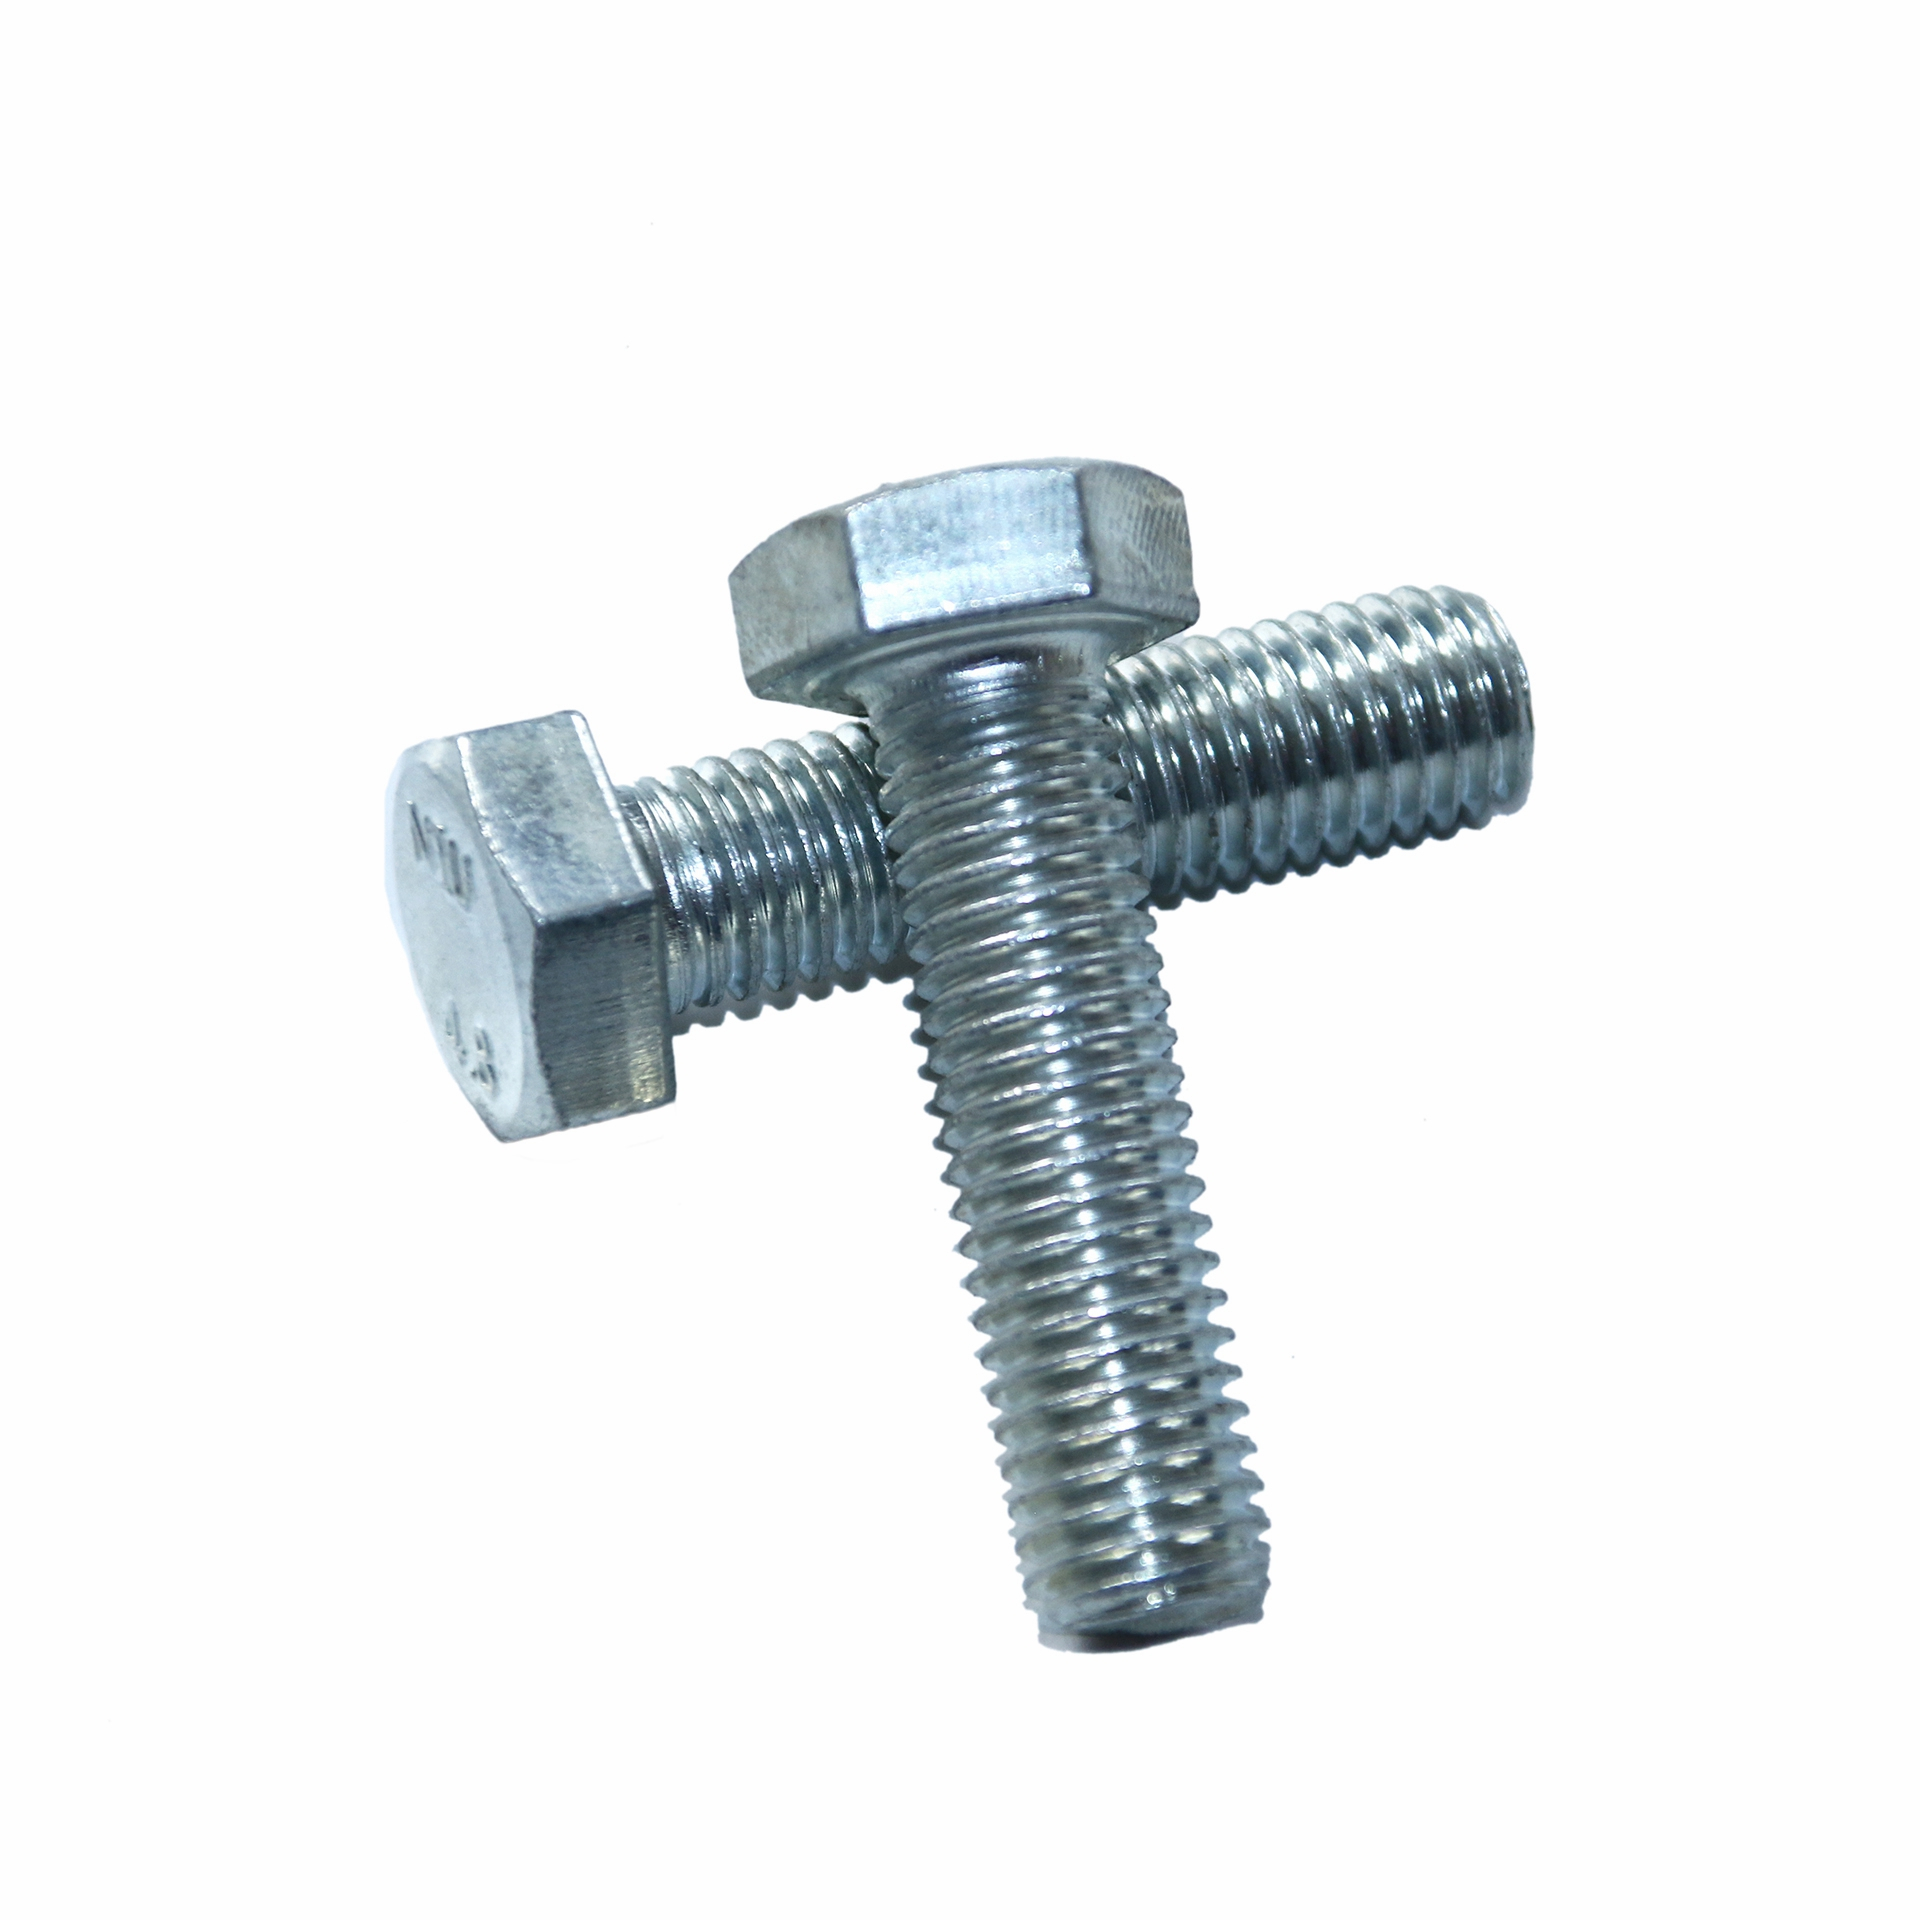 HEBEI CHAISHI NEW ENERGY TECHNOLOGY CO., LTD. , Factory direct supply blue zinc hex bolt DIN933 in stock